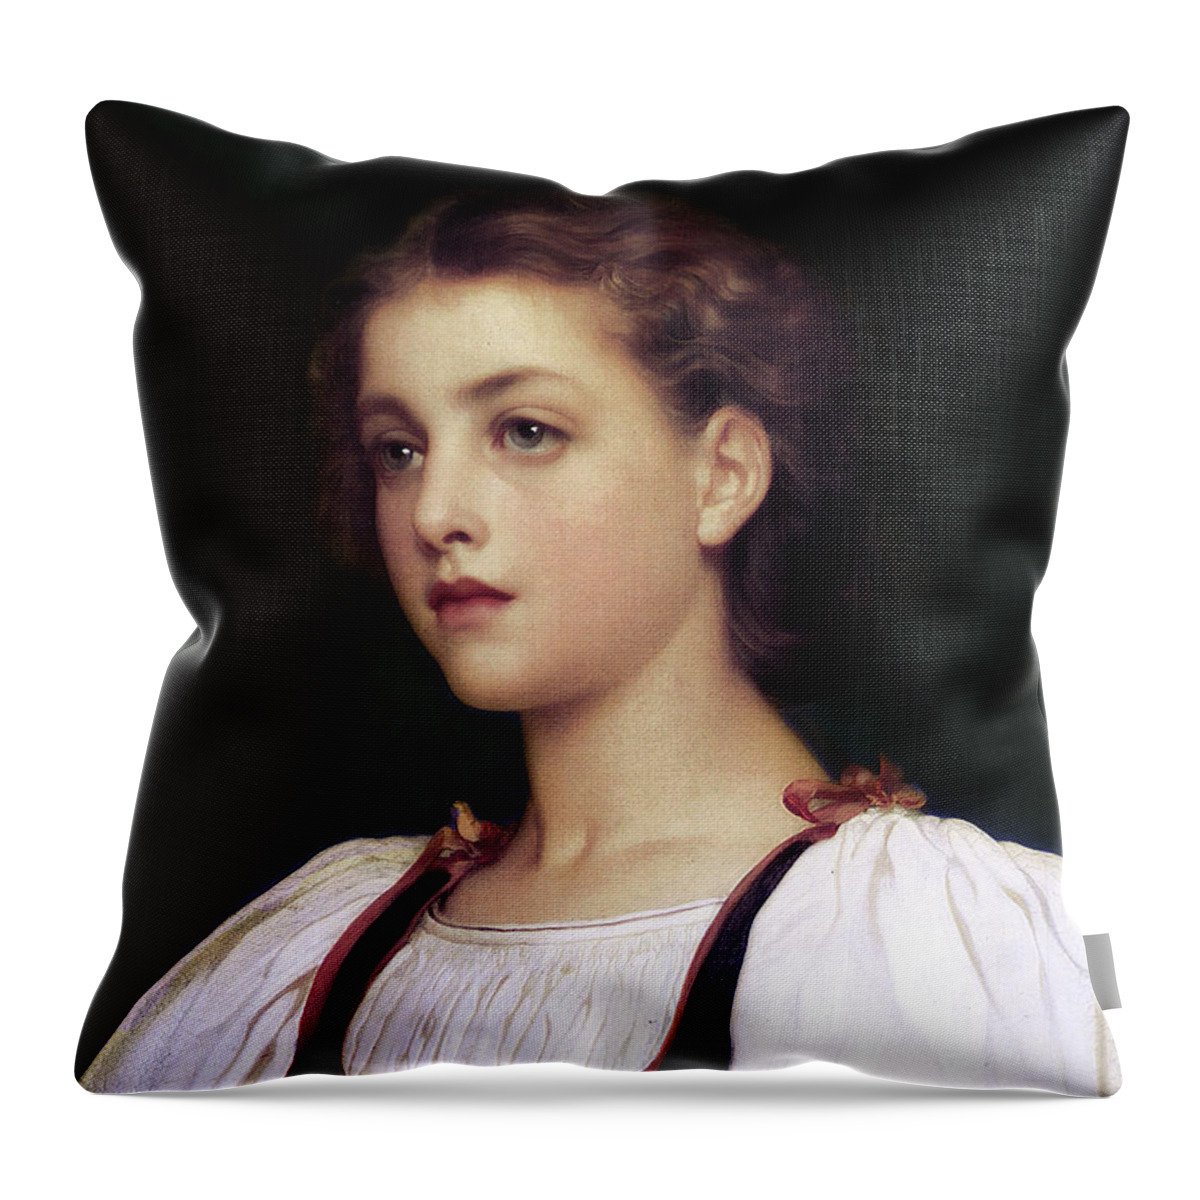 Biondina Throw Pillow featuring the digital art Biondina by Lord Frederic Leighton by Rolando Burbon